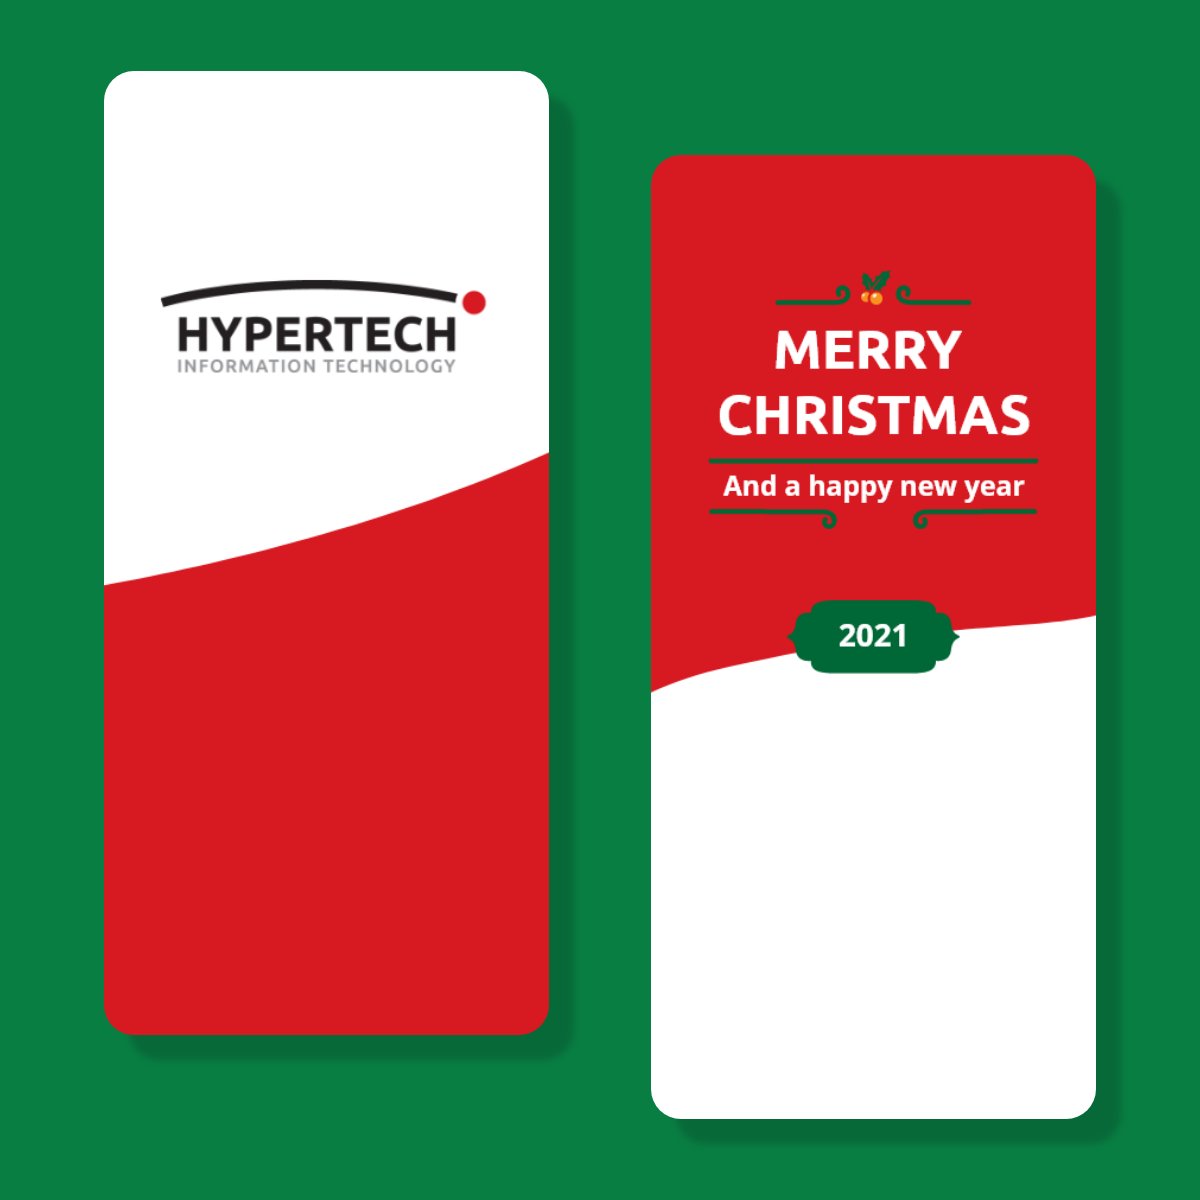 🎄May the melody and spirit of the holidays fill your home with love and peace. HYPERTECH wishes you and your family Merry Christmas and a Happy New Year!🎄